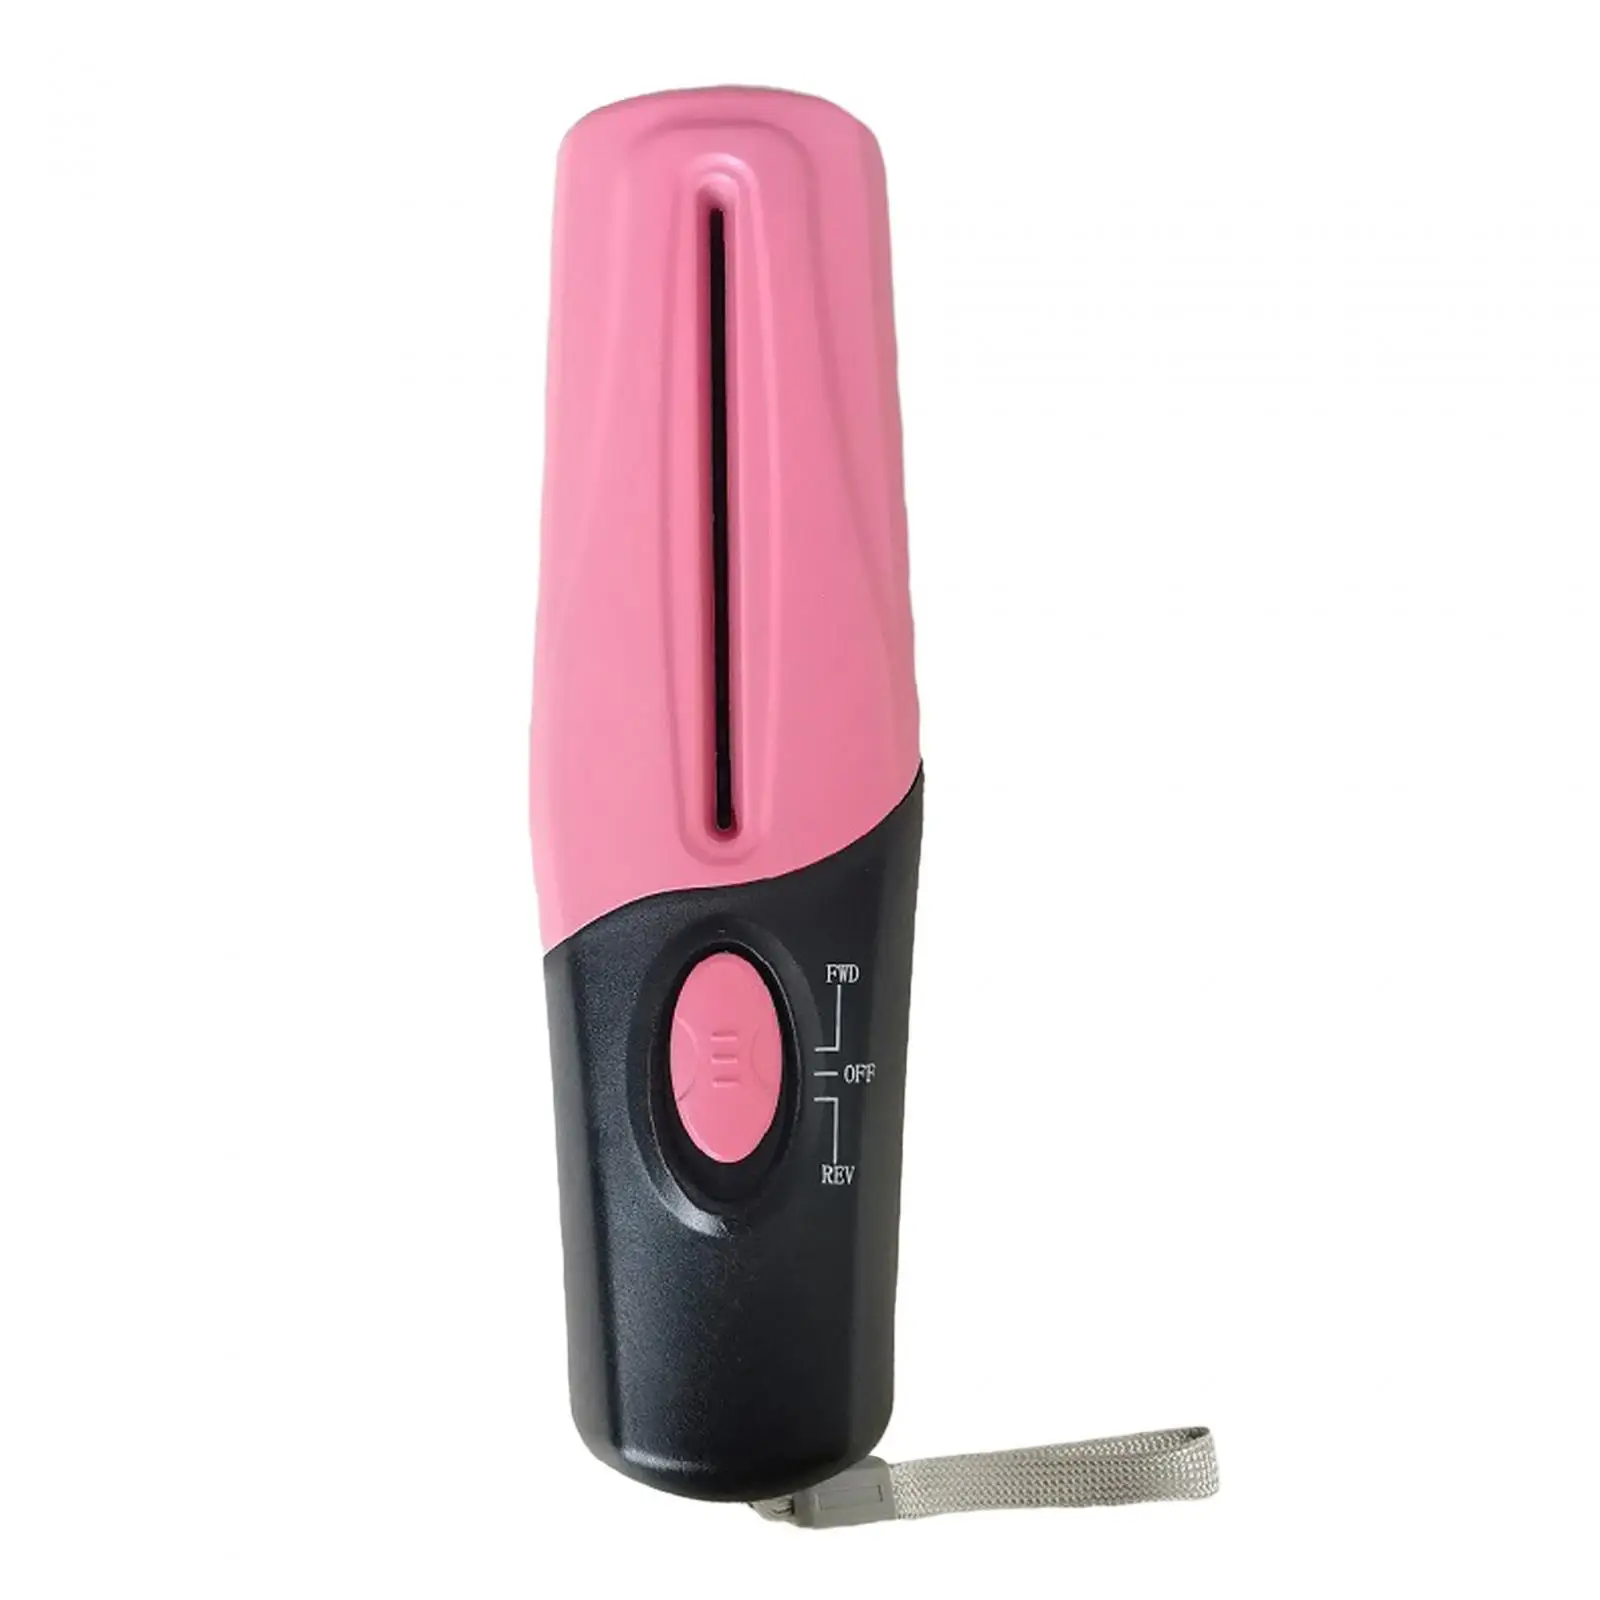 Handheld Paper Shredder Straight Cut Small USB/Battery Powered Paper Cutting Tool for Card Portrait Photos Home Use Documents